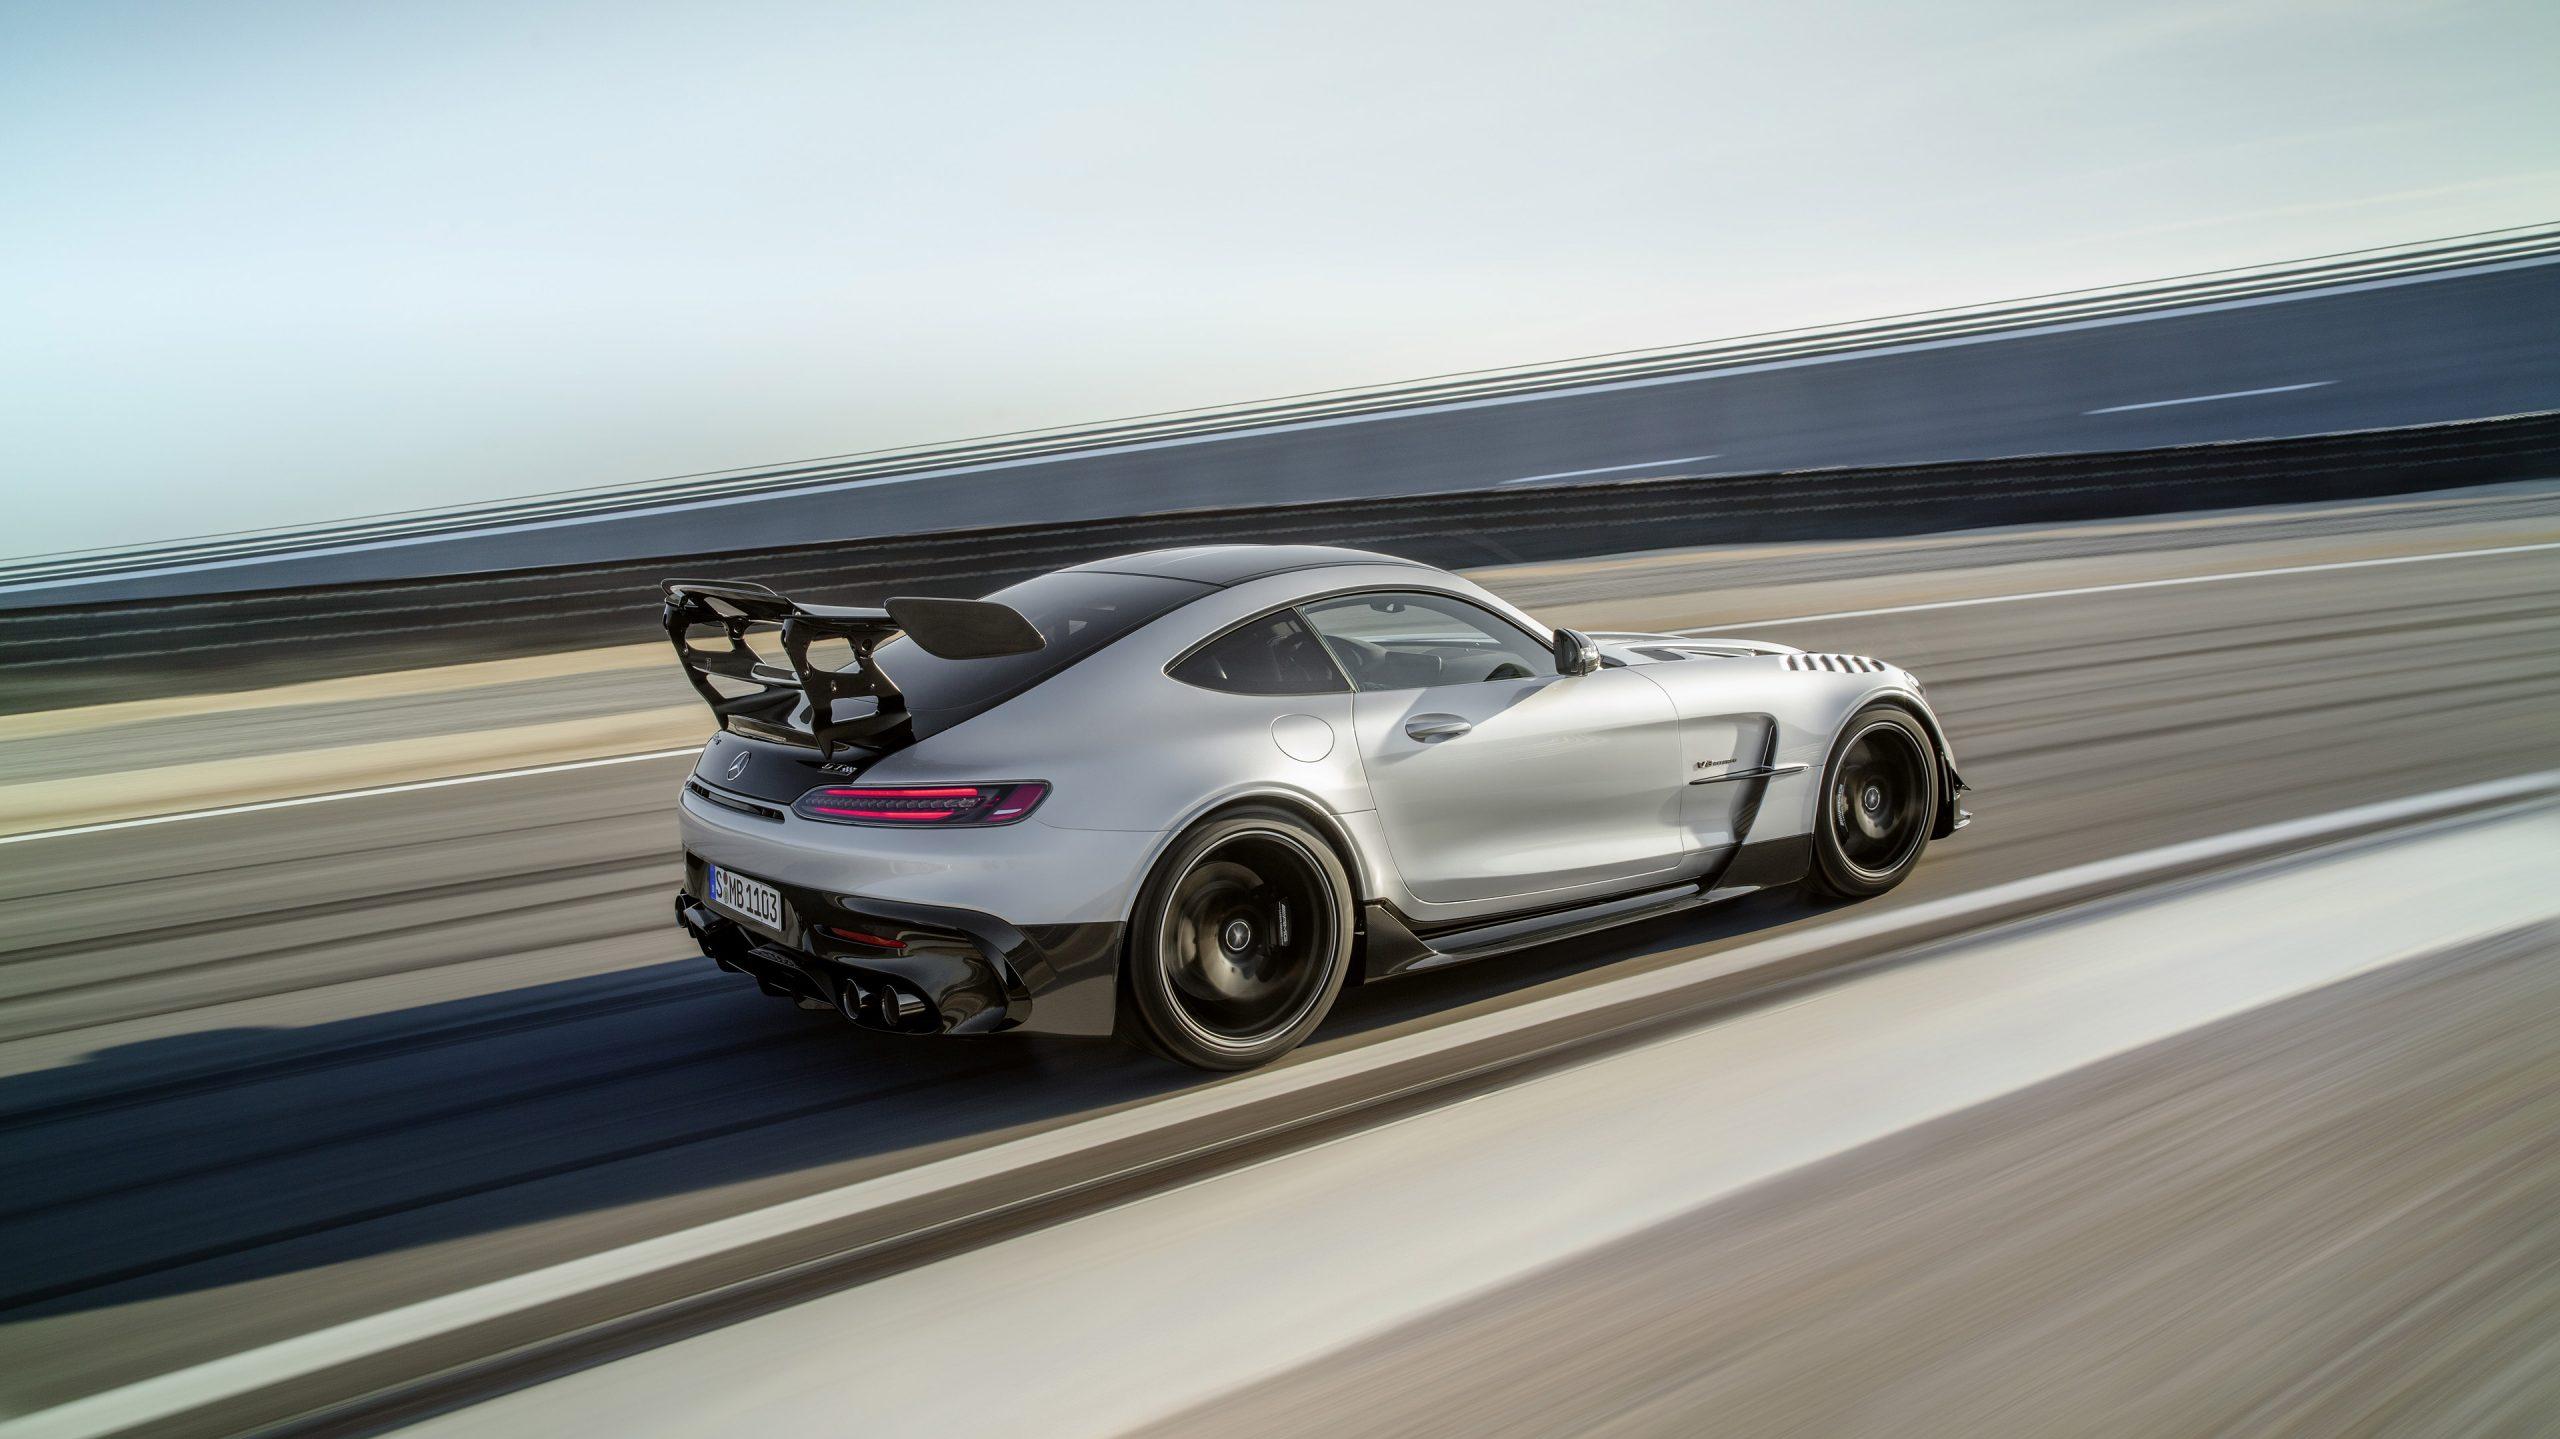 Mercedes Amg Gt Black Series Will Go To Australia And Be Capped At